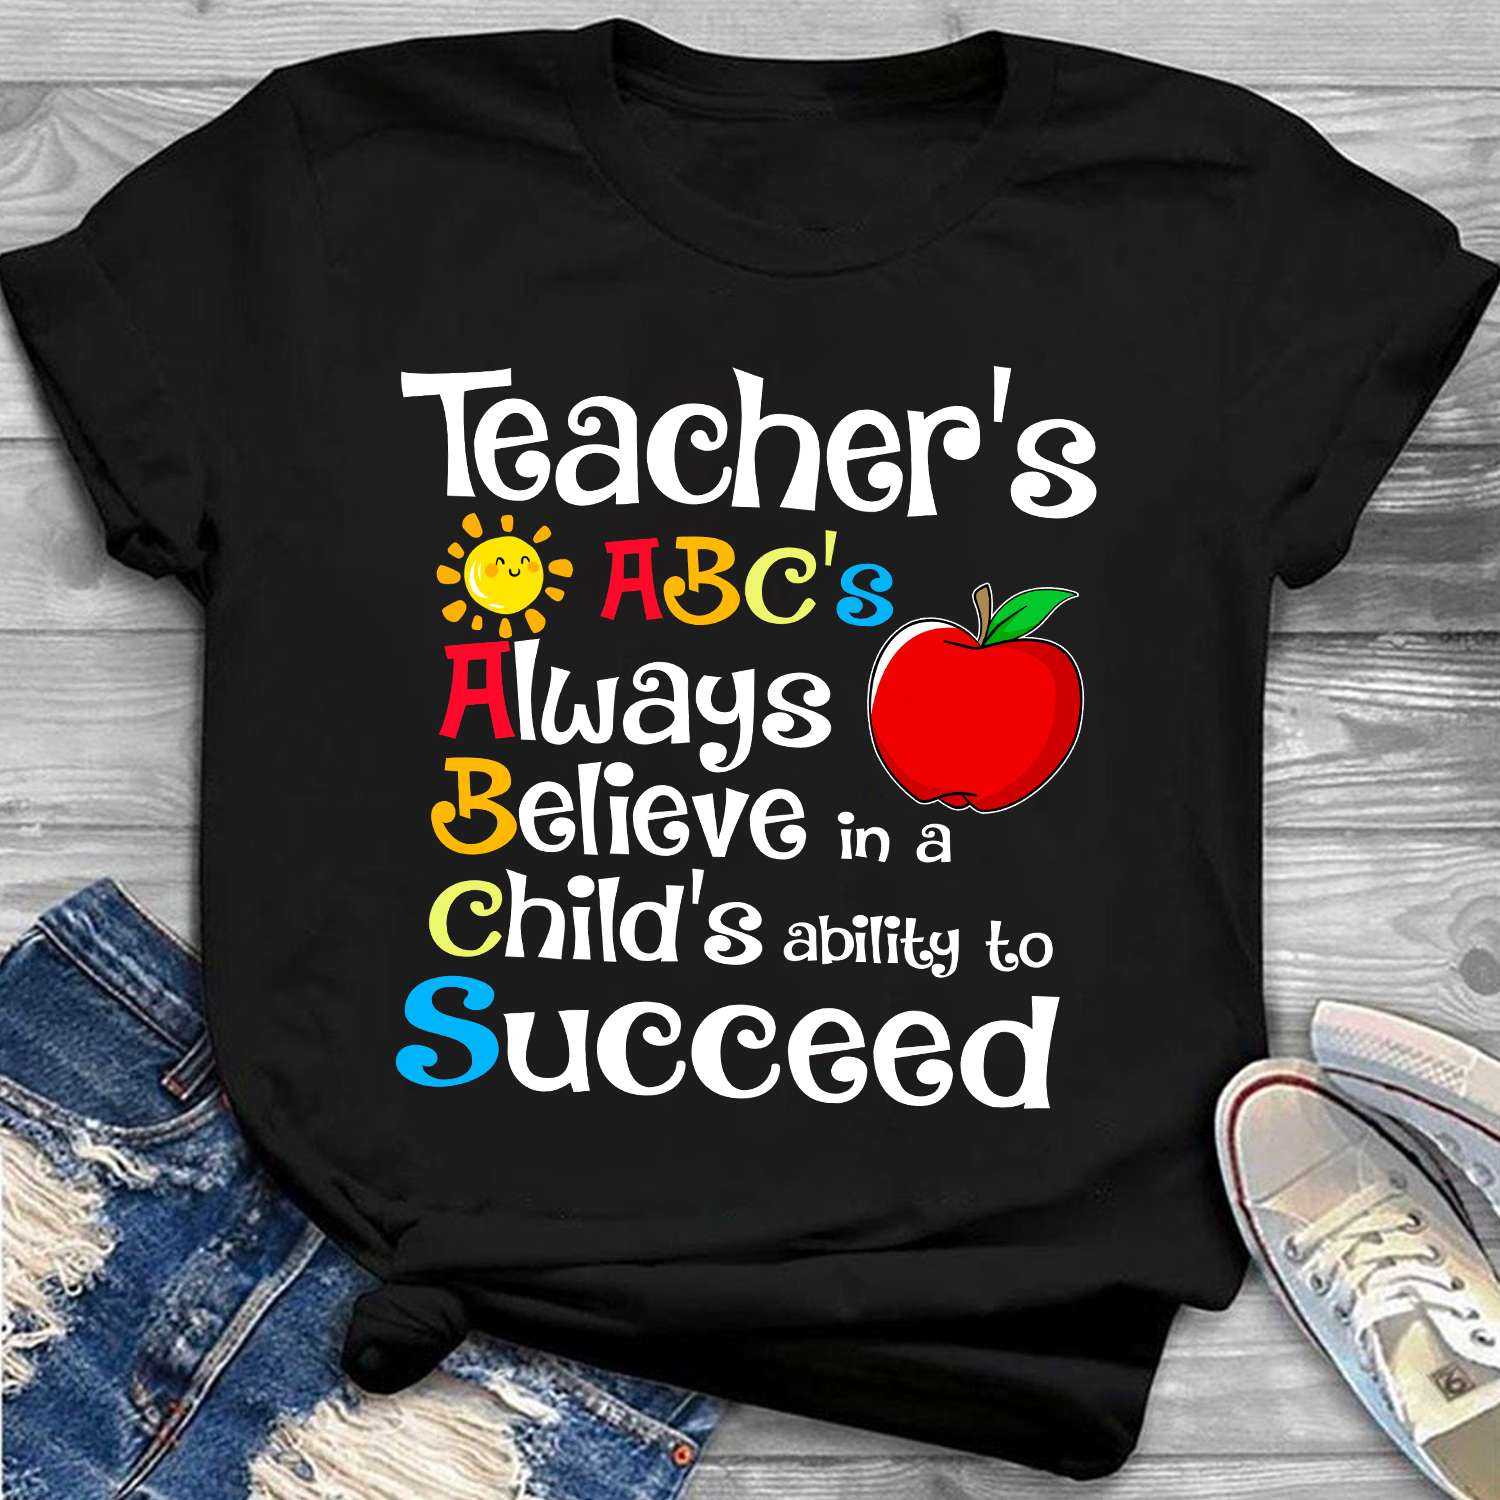 Teacher's ABC's Always Believe in a Child's ability to Succeed